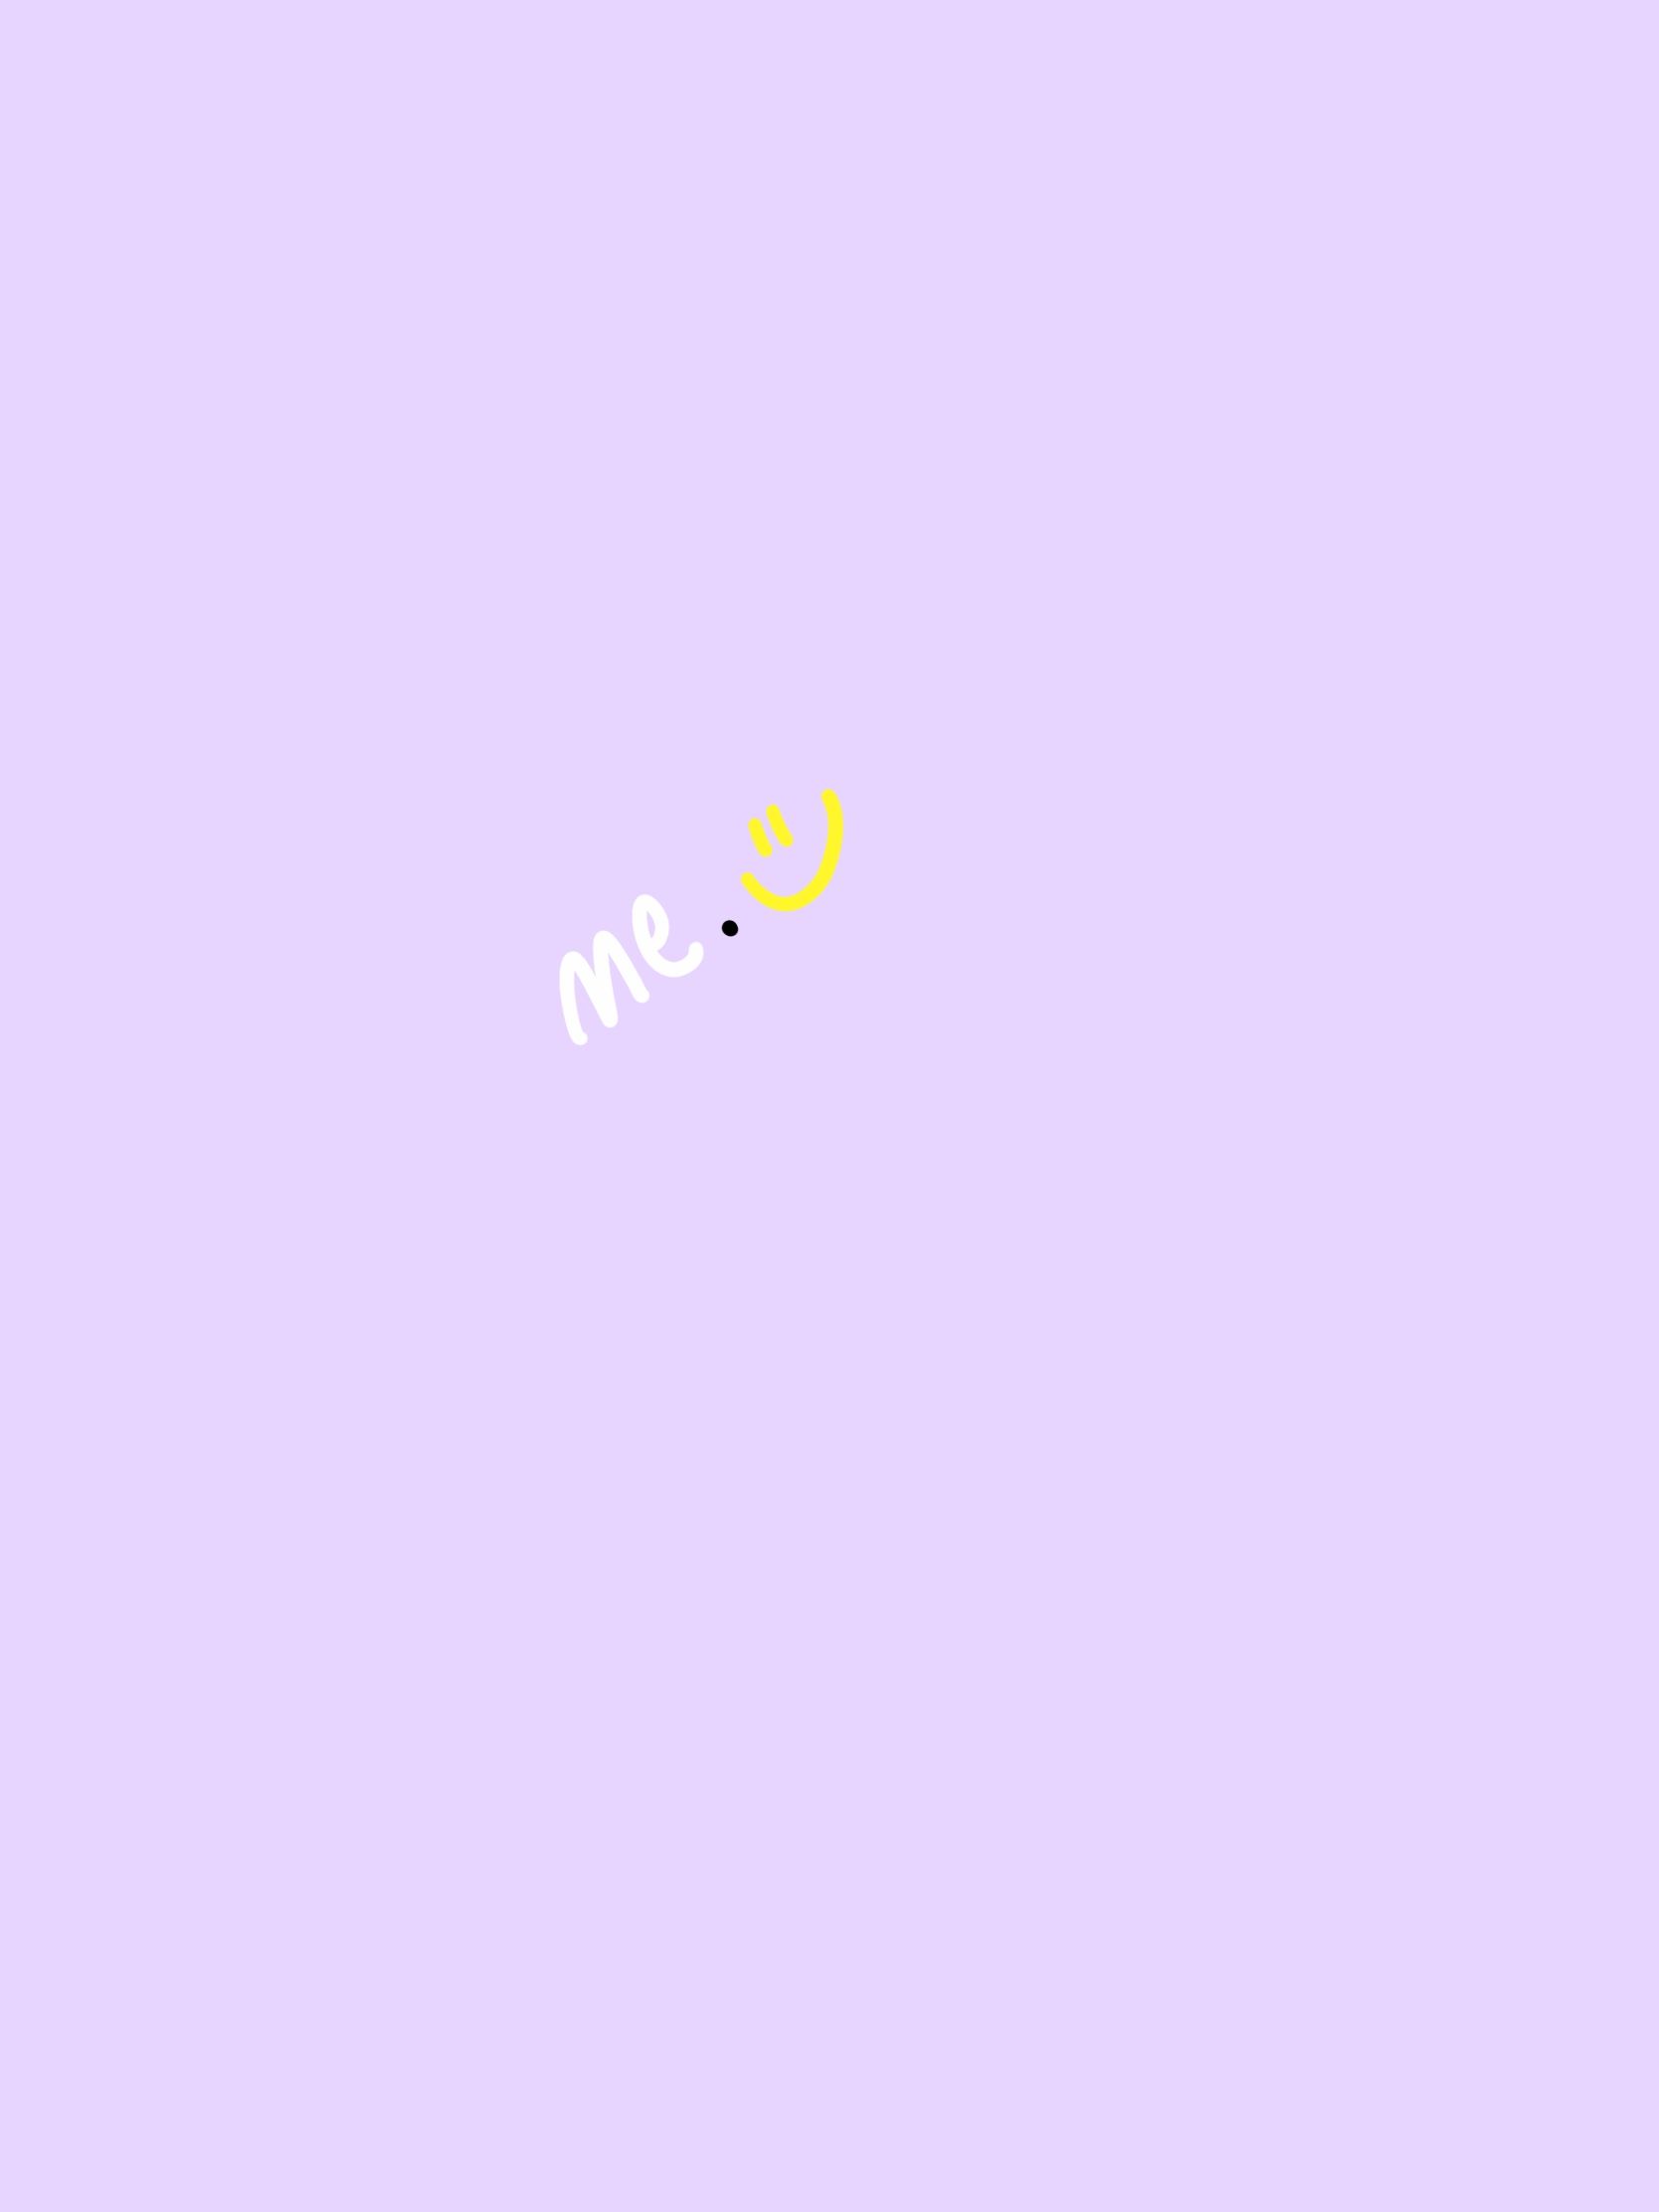 Me. Smile. Lavender background. White letters. Smile face. iPhone